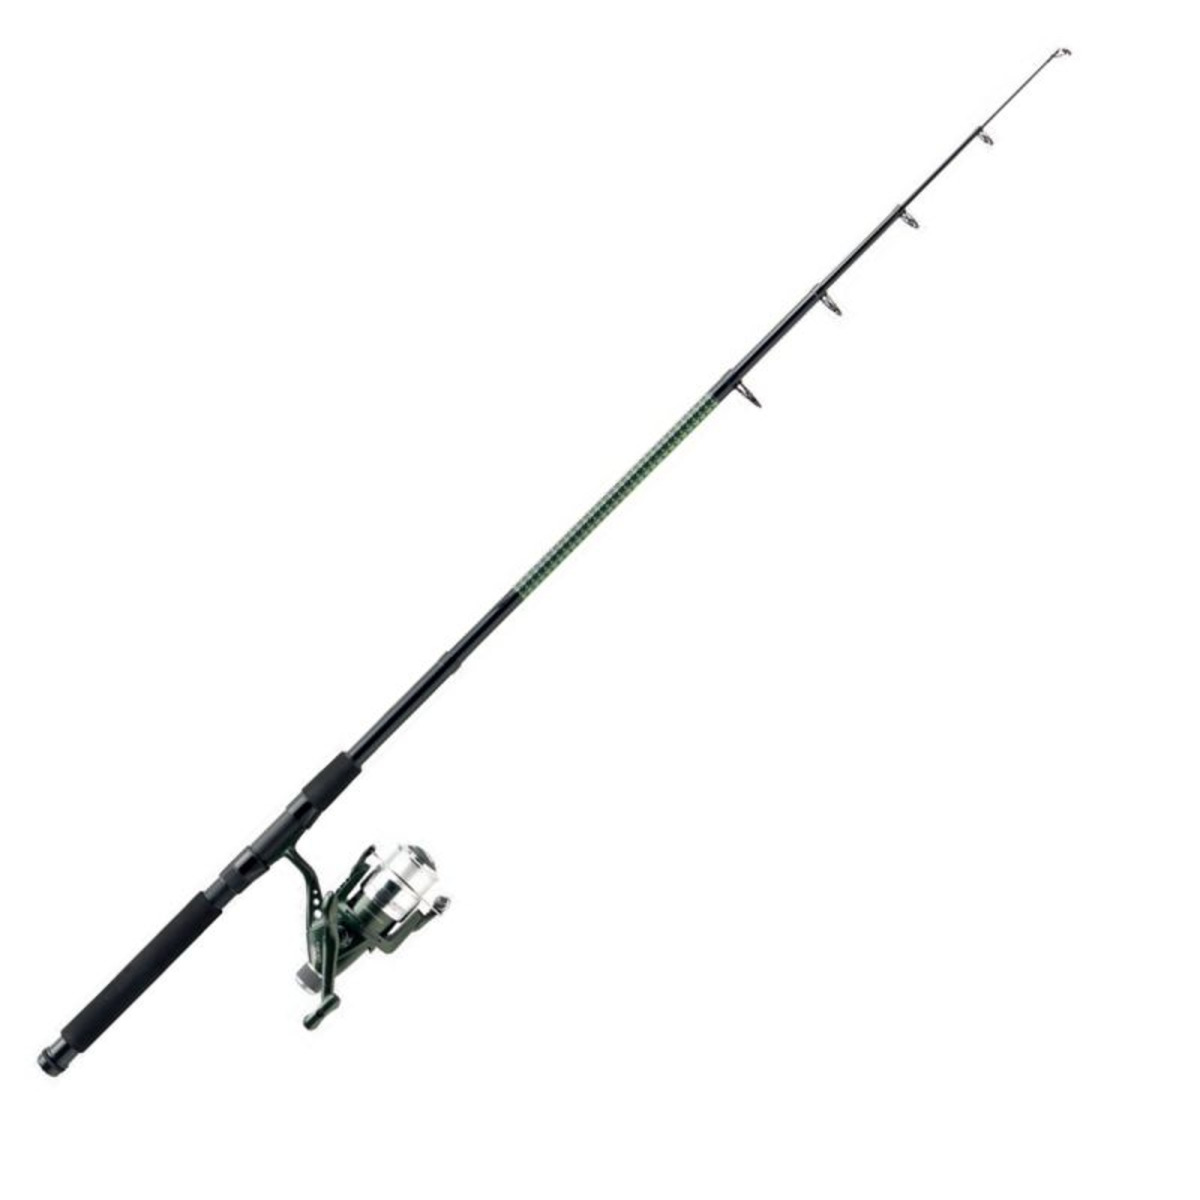 Mitchell GT Pro Spin Telescopic - 2.70 m - 20-60 g - Reel 4000 RD